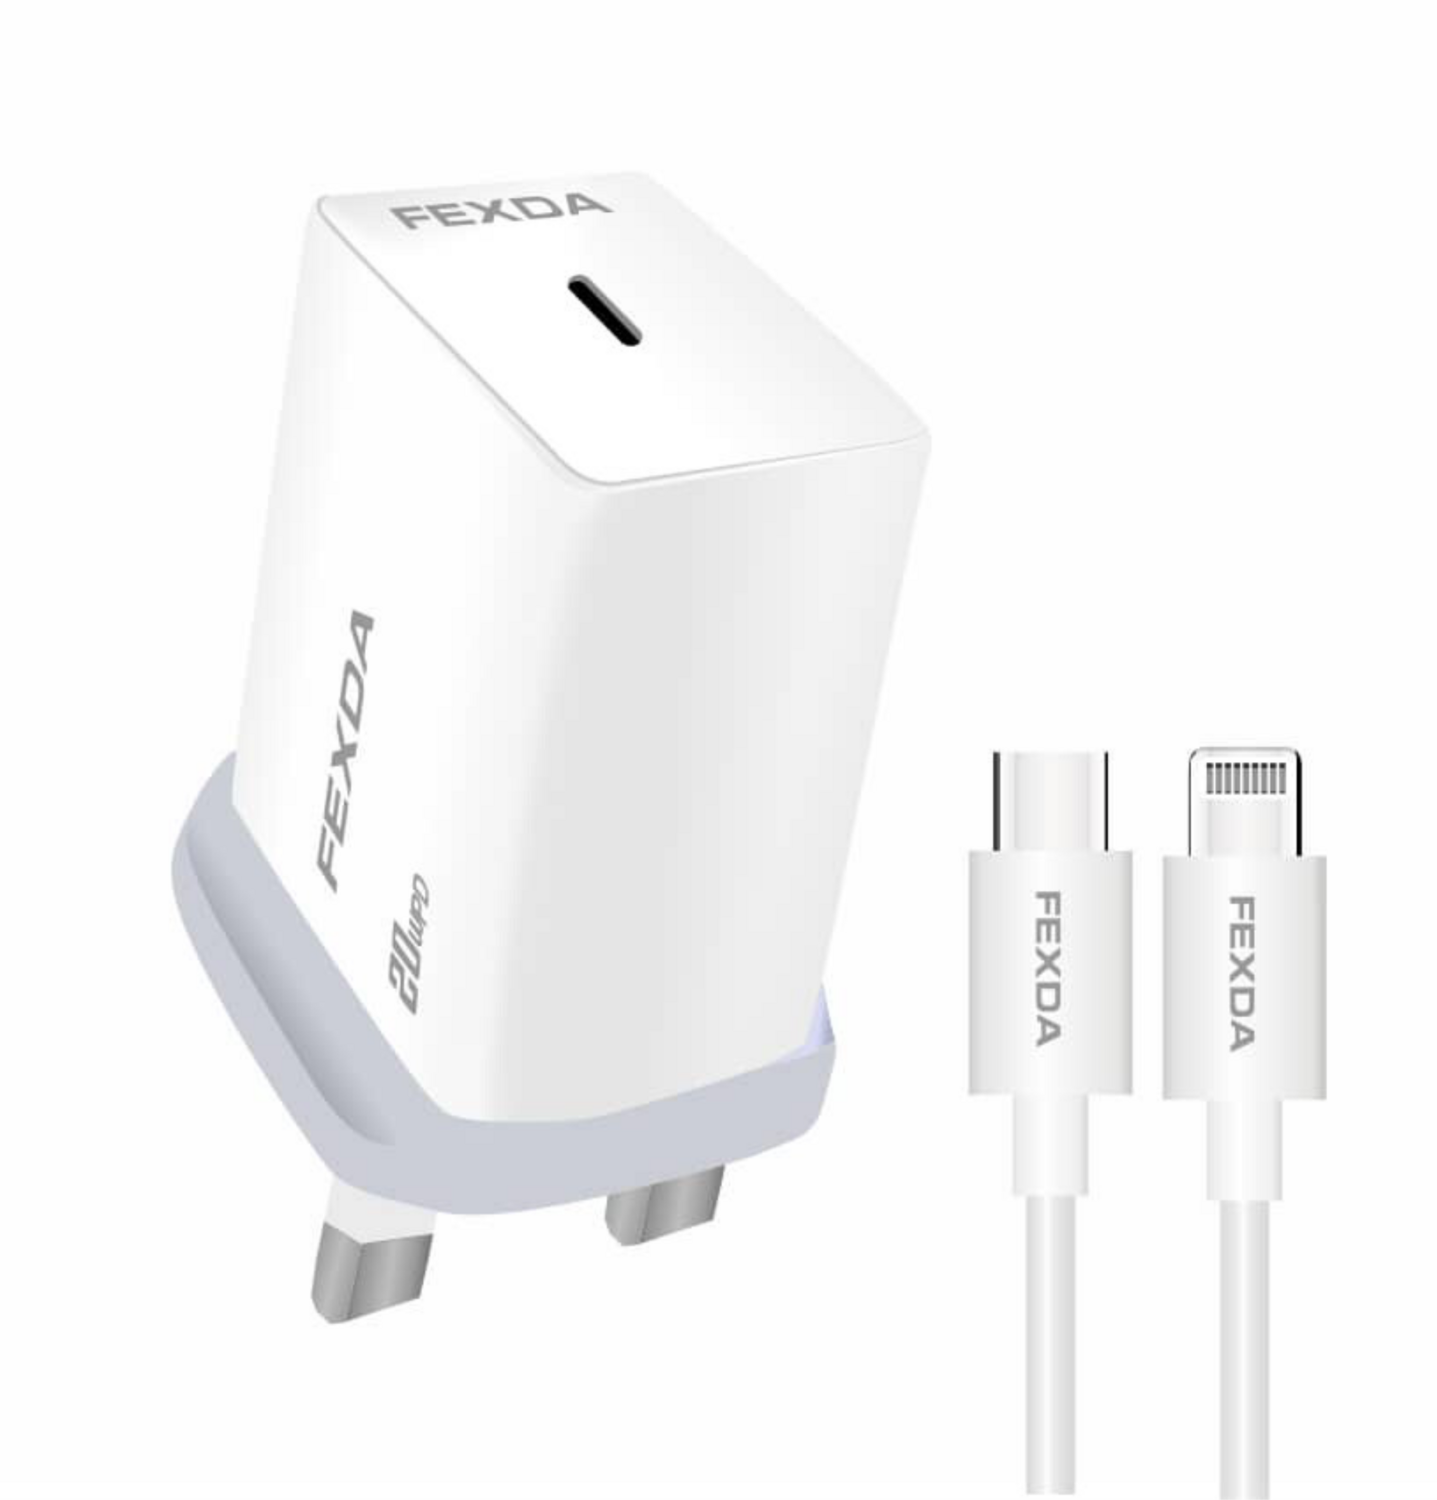 C2E PD 20W USB-C Fast Charger
&amp; 30W USB-C to Lighting Cable